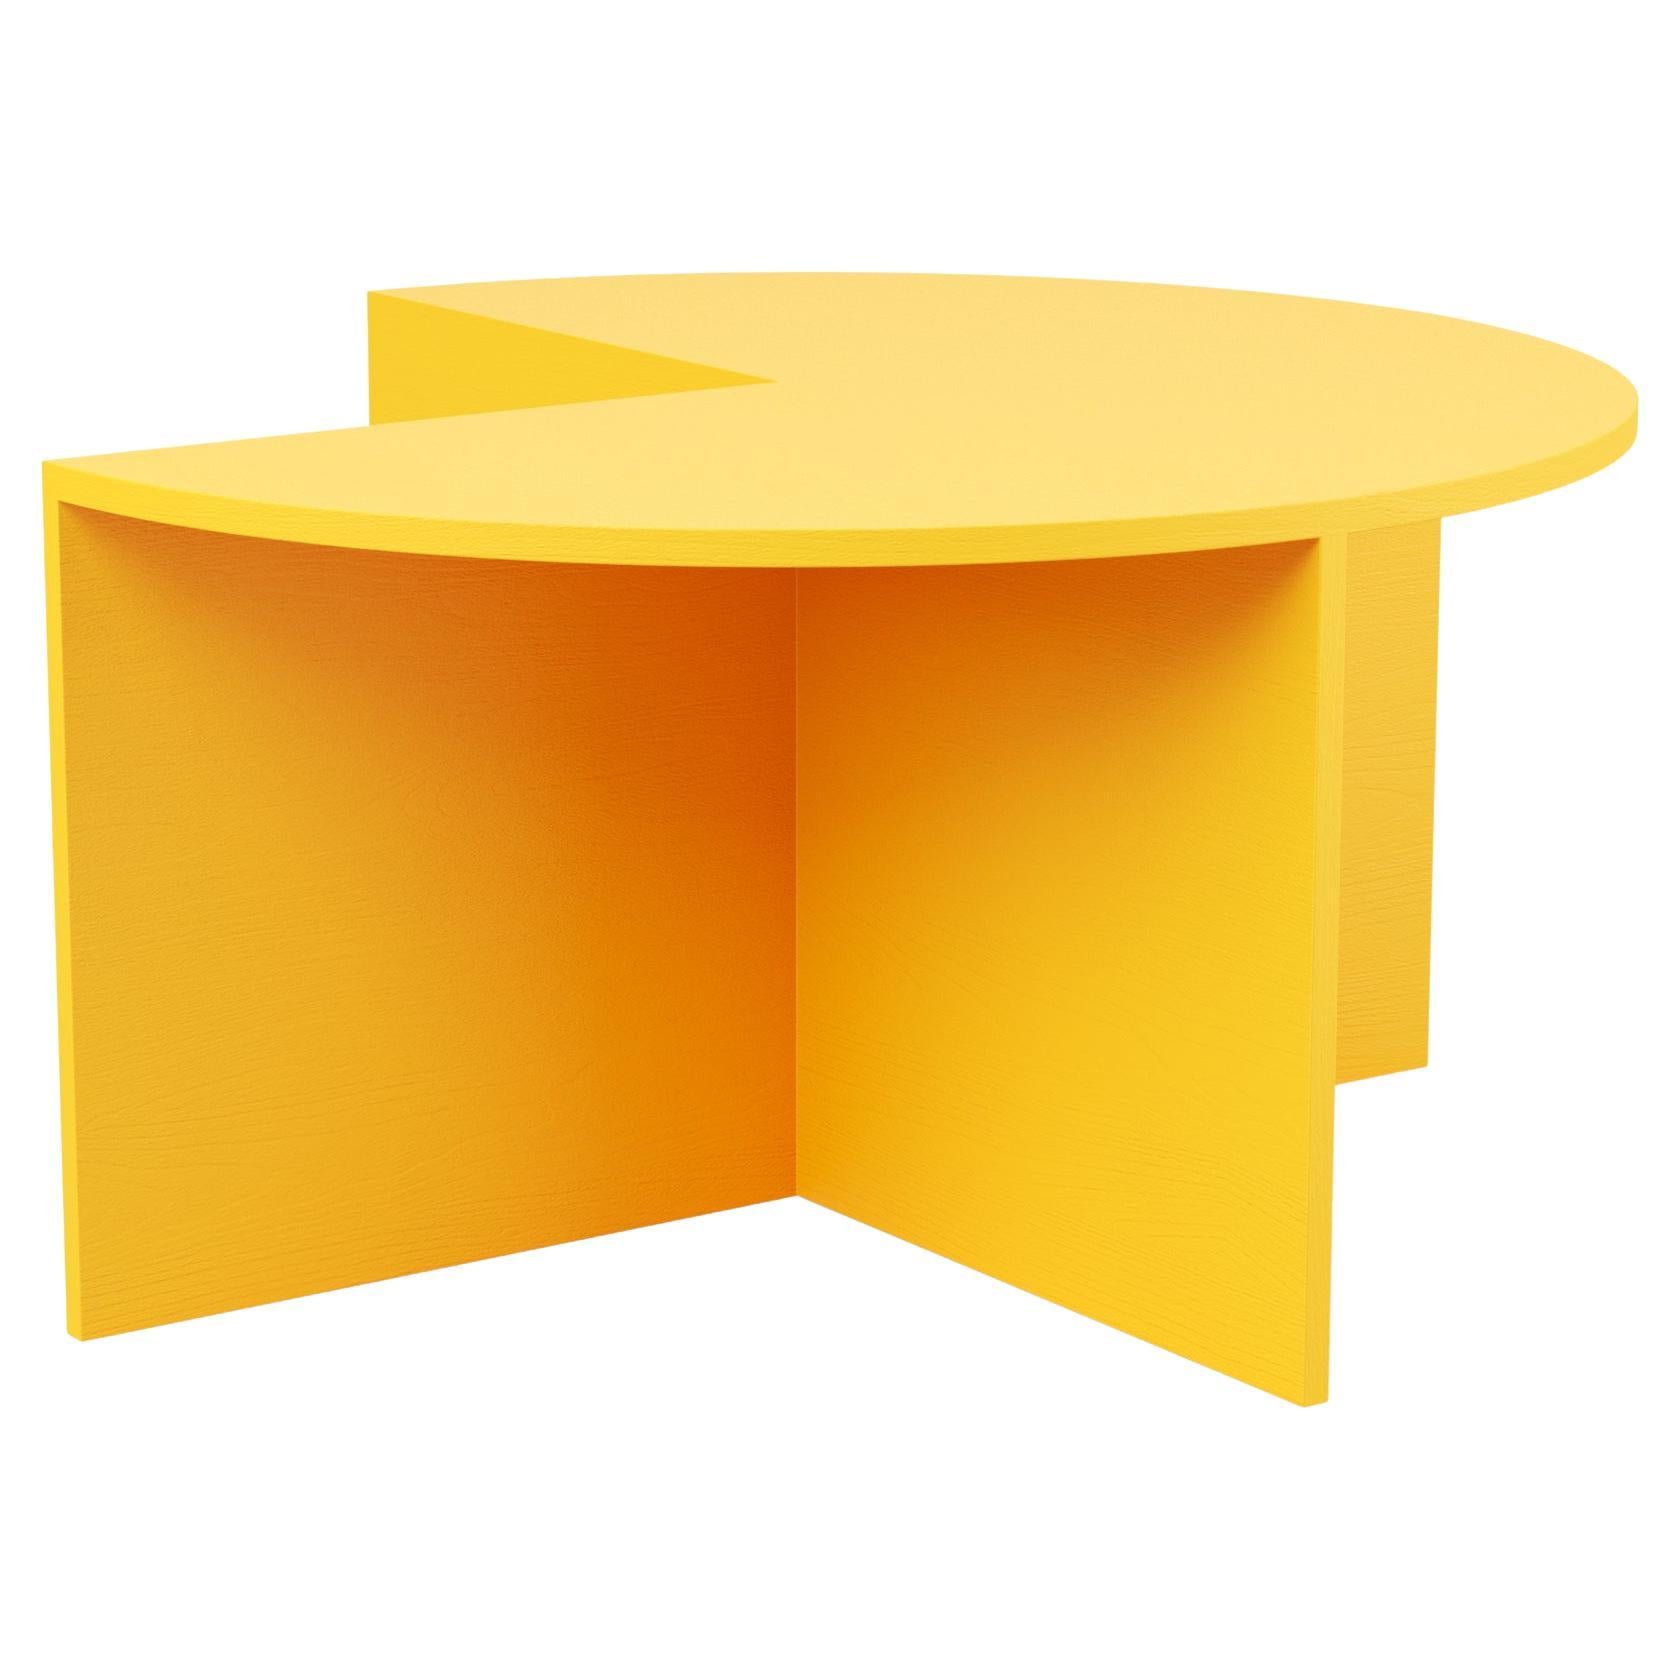 Hayche Pie Chart System 3/4 Table, Yellow, Solid Wood, UK, Made To Order For Sale